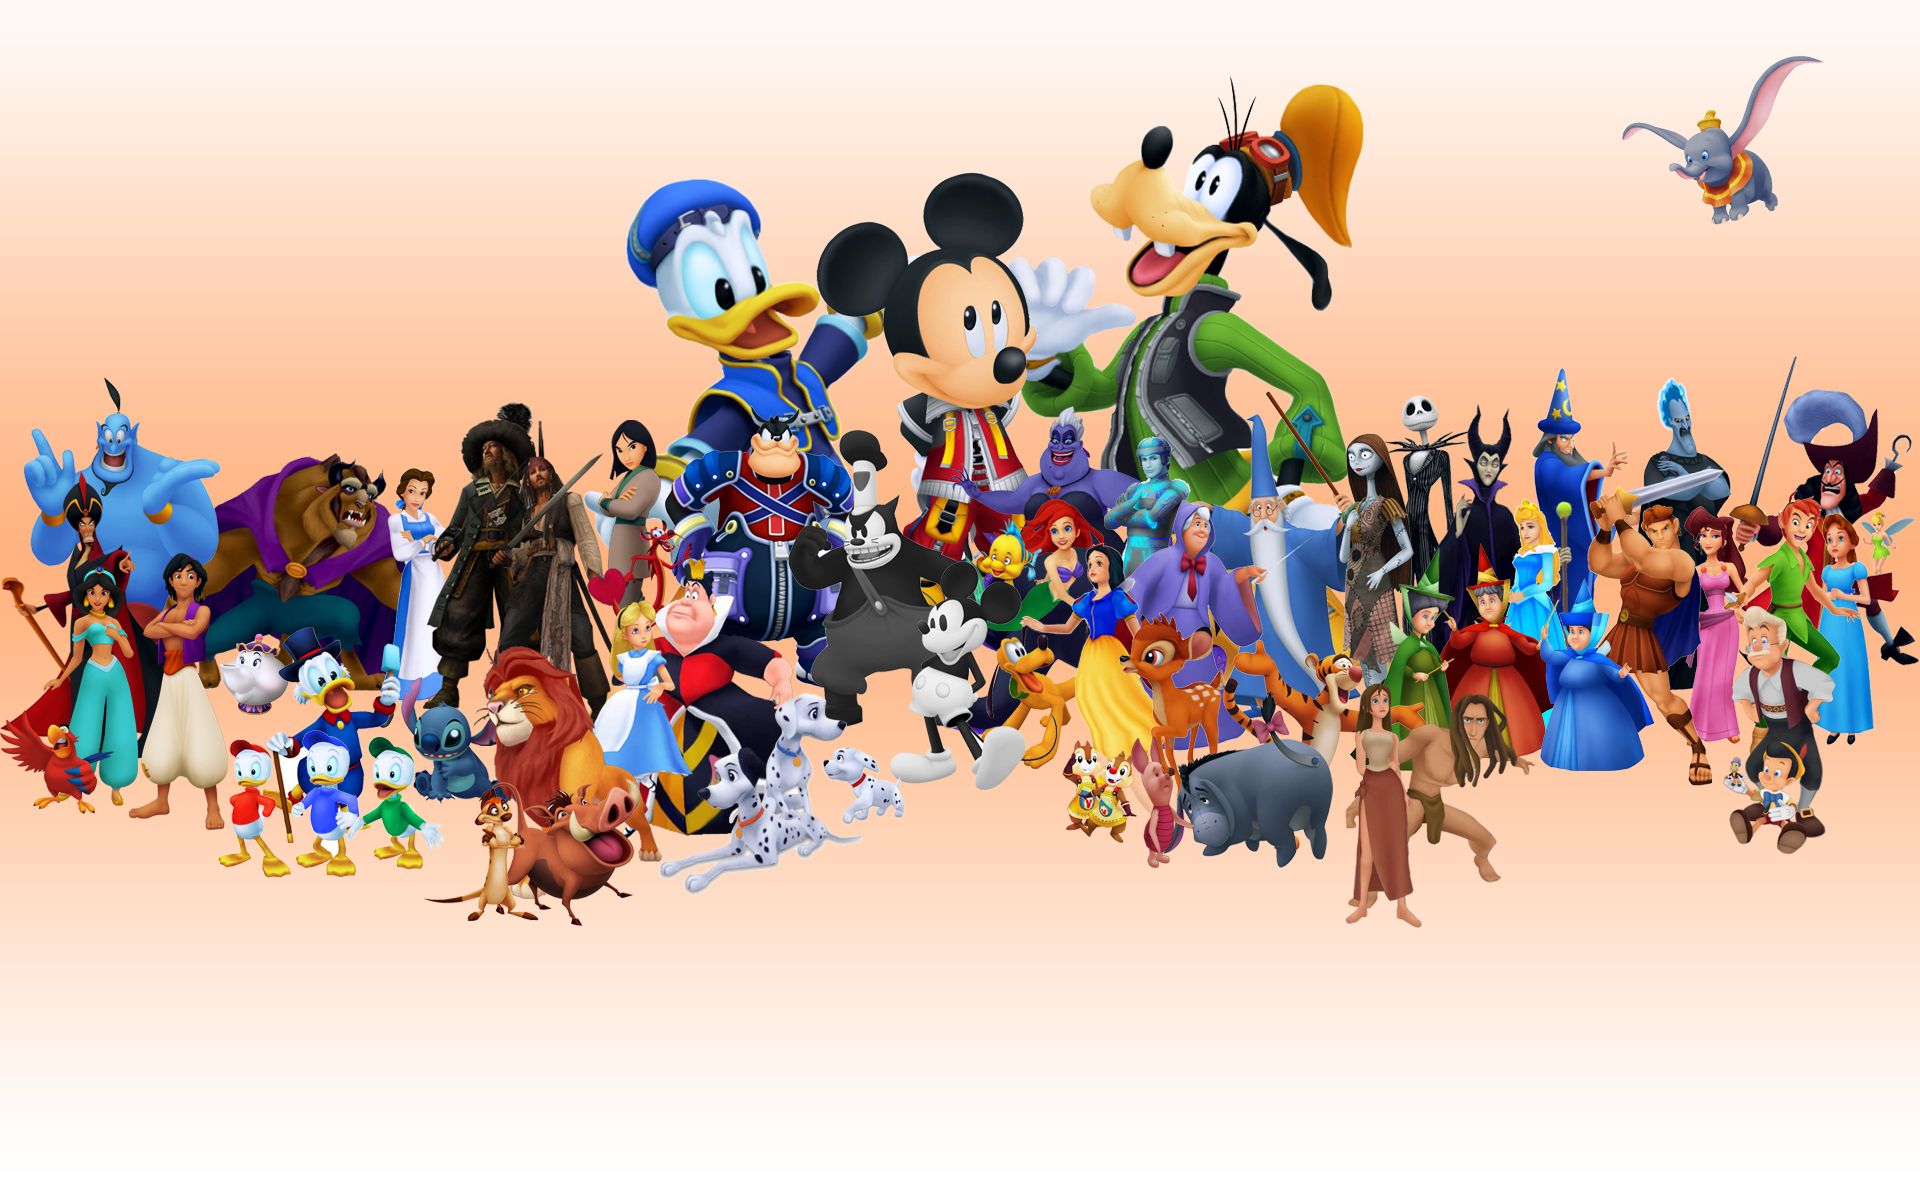 Background Images About Disney With Cartoons All Hd - High Resolution Disney Character , HD Wallpaper & Backgrounds